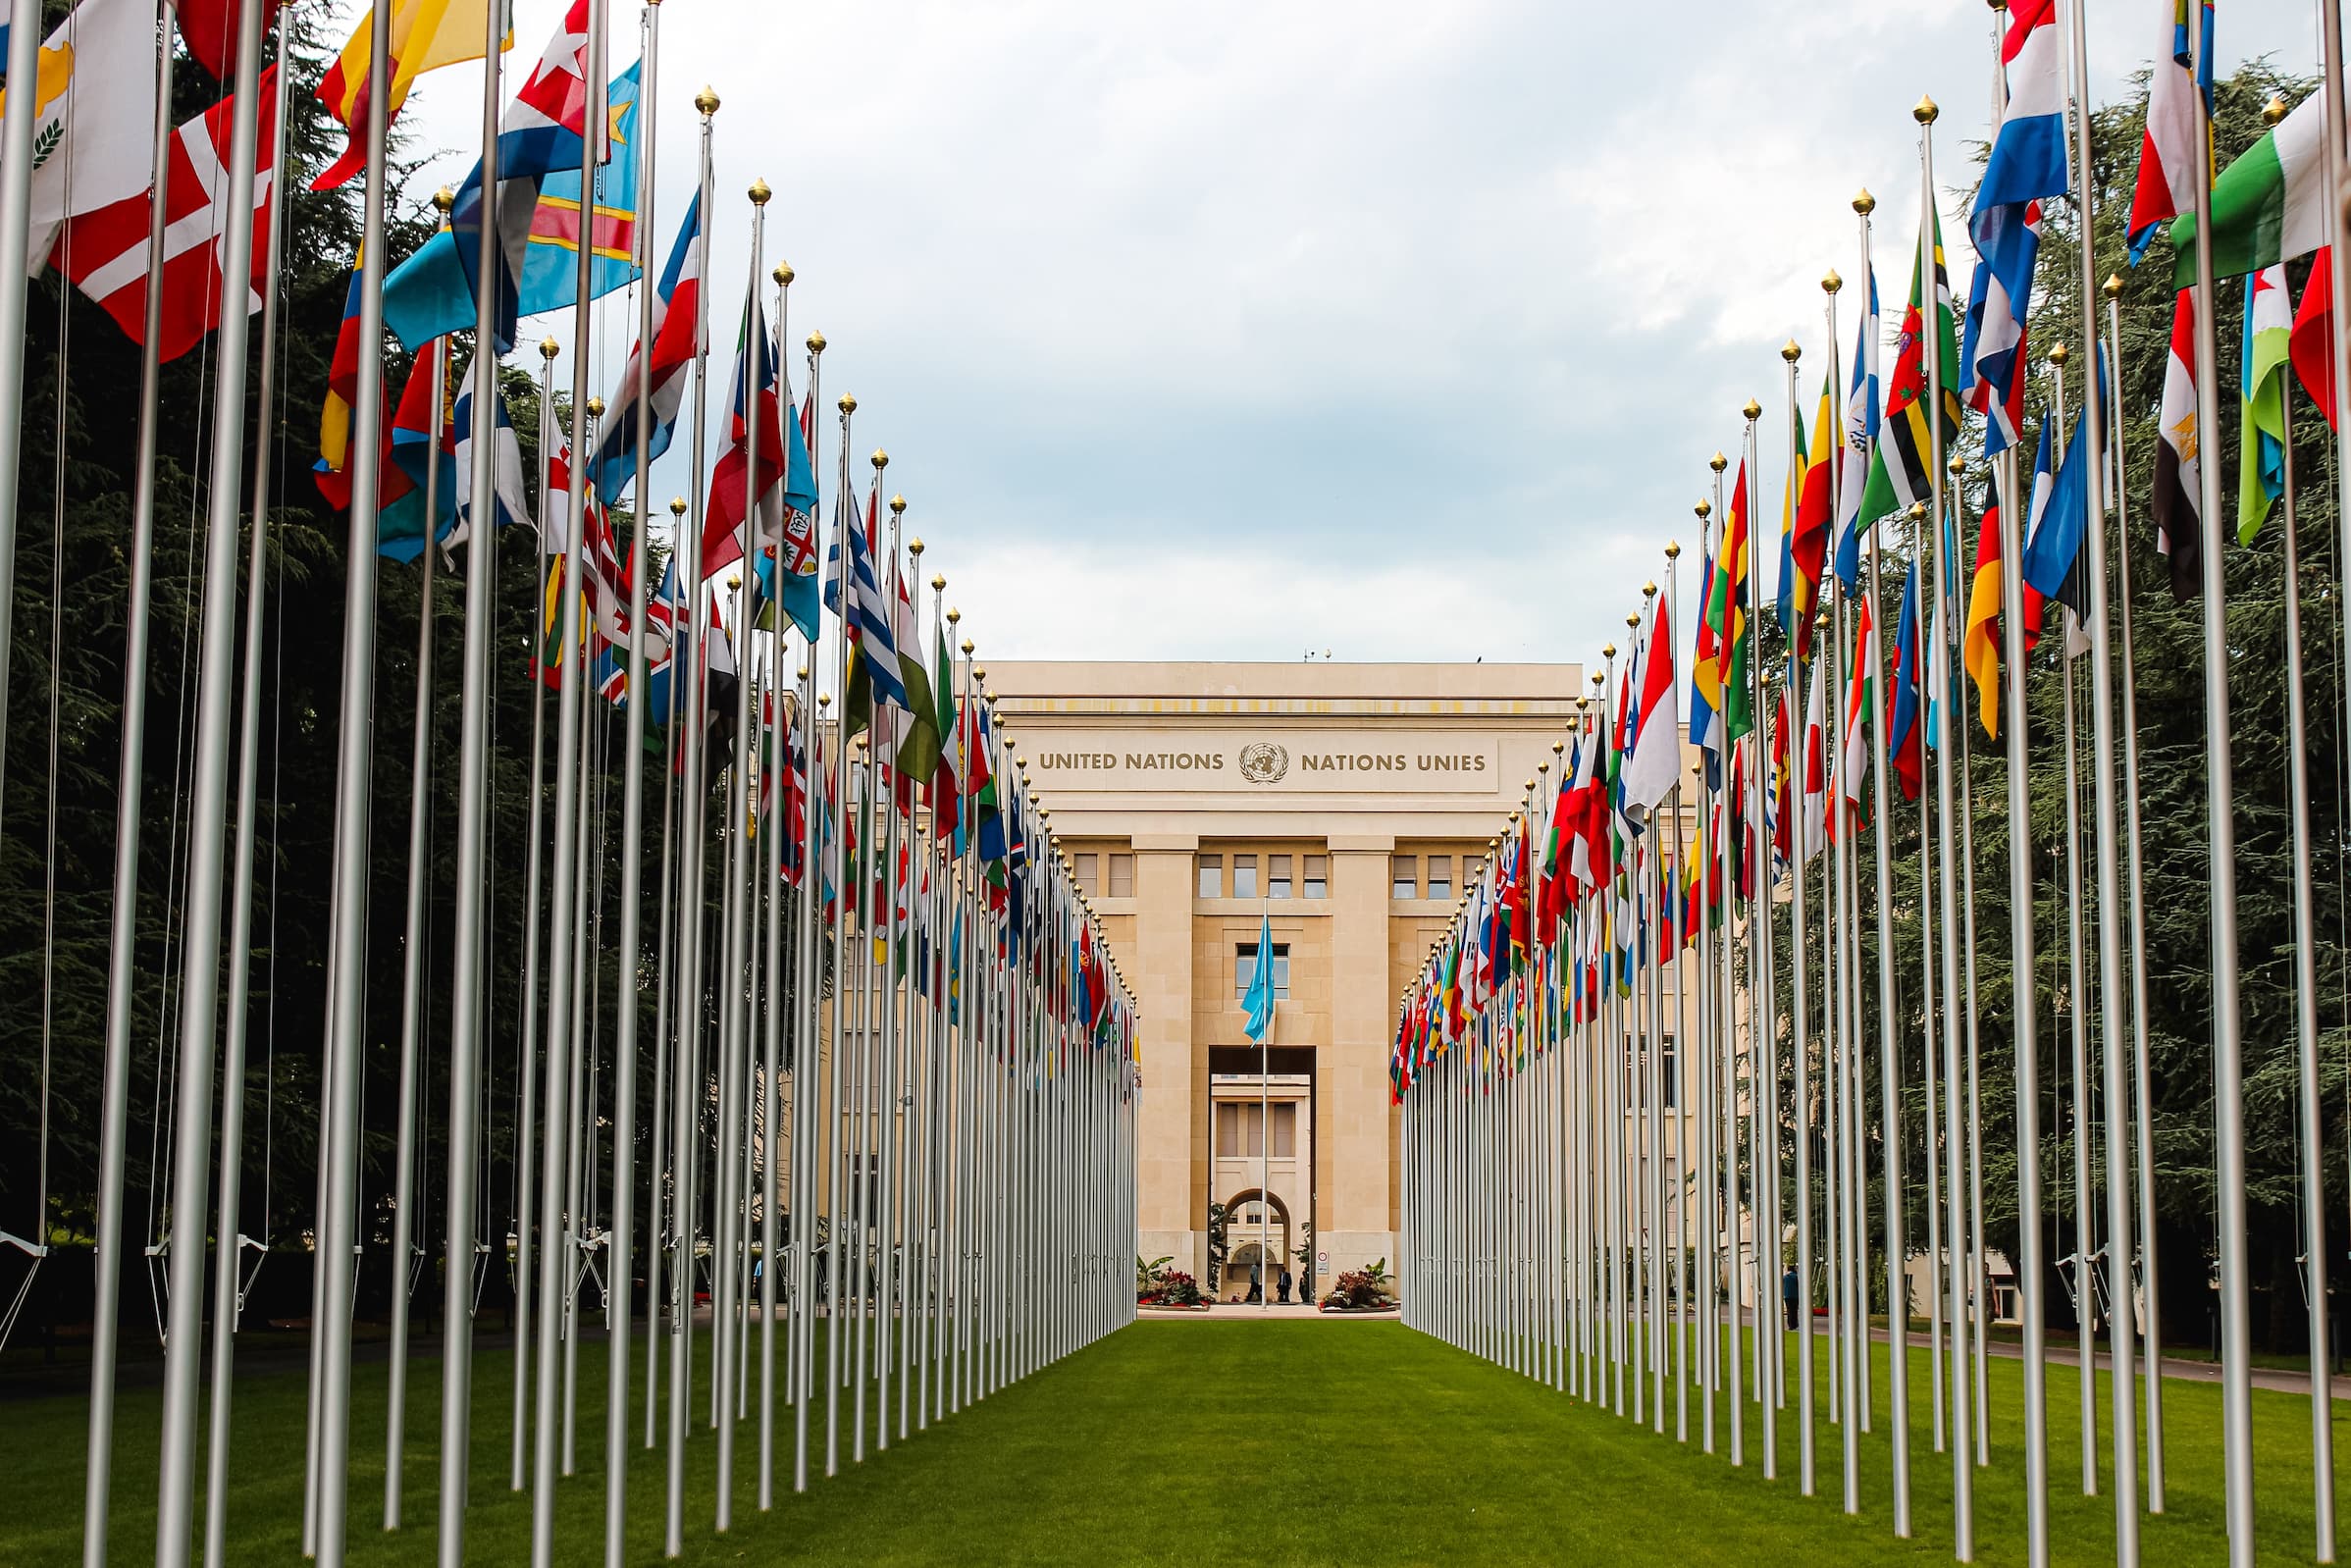 United nations' flag lined grass pathway leading to entrance